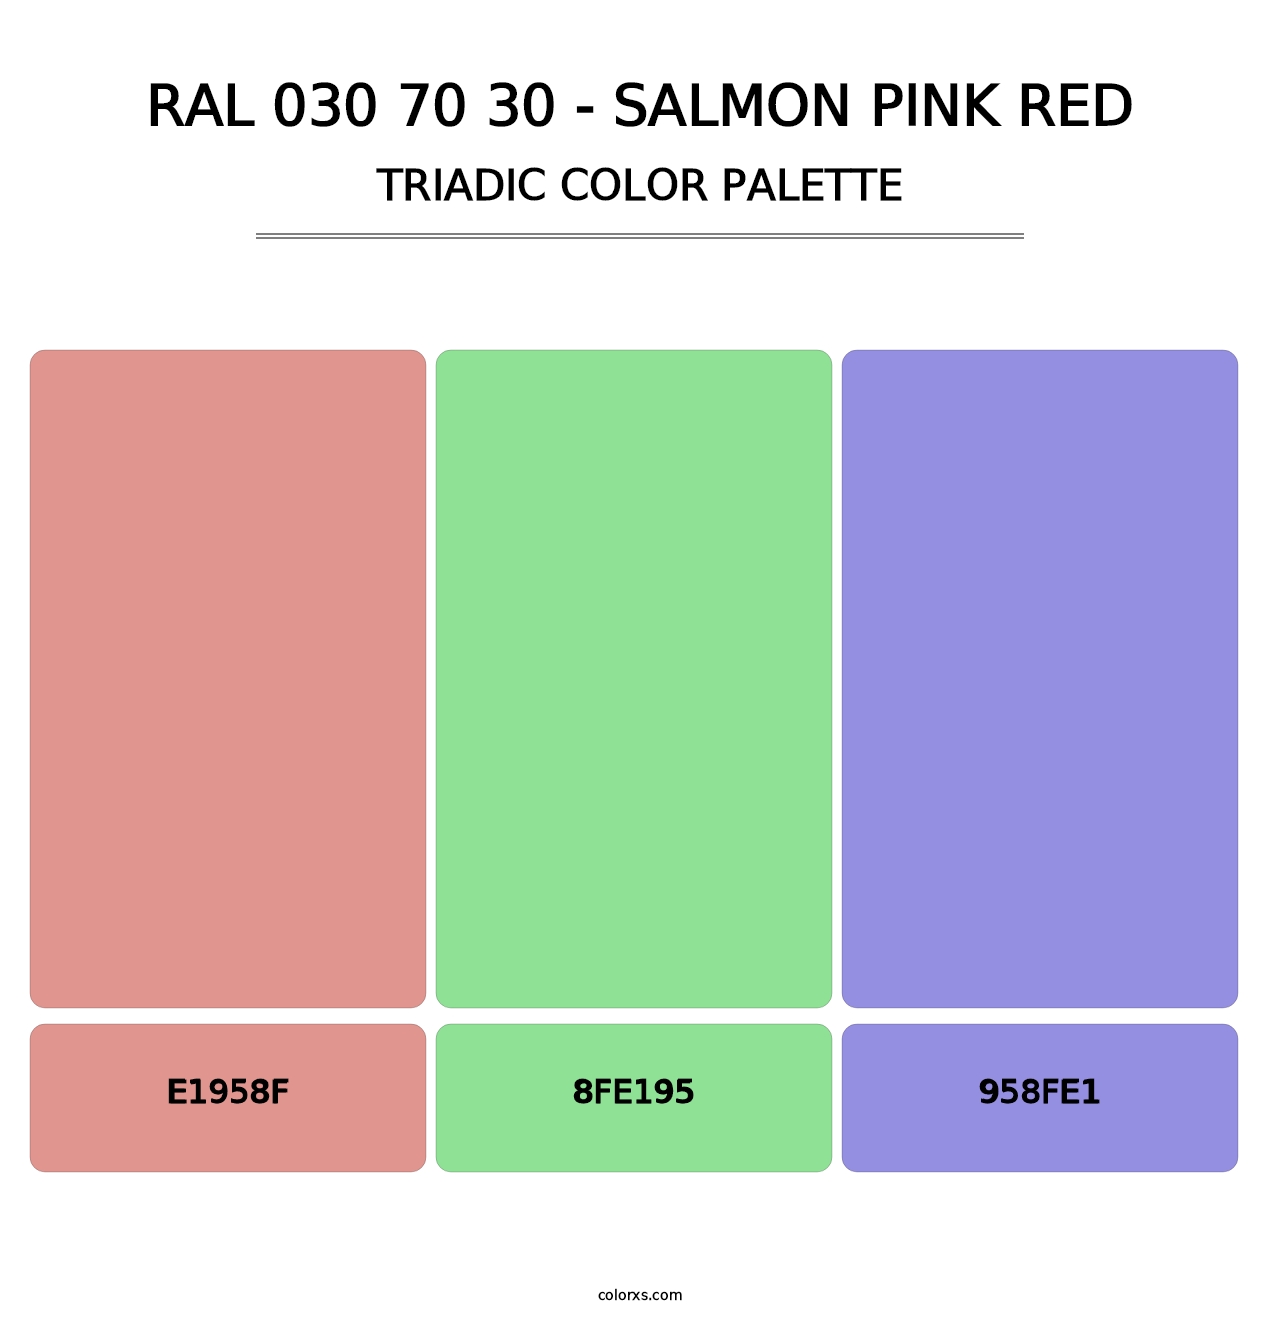 RAL 030 70 30 - Salmon Pink Red - Triadic Color Palette